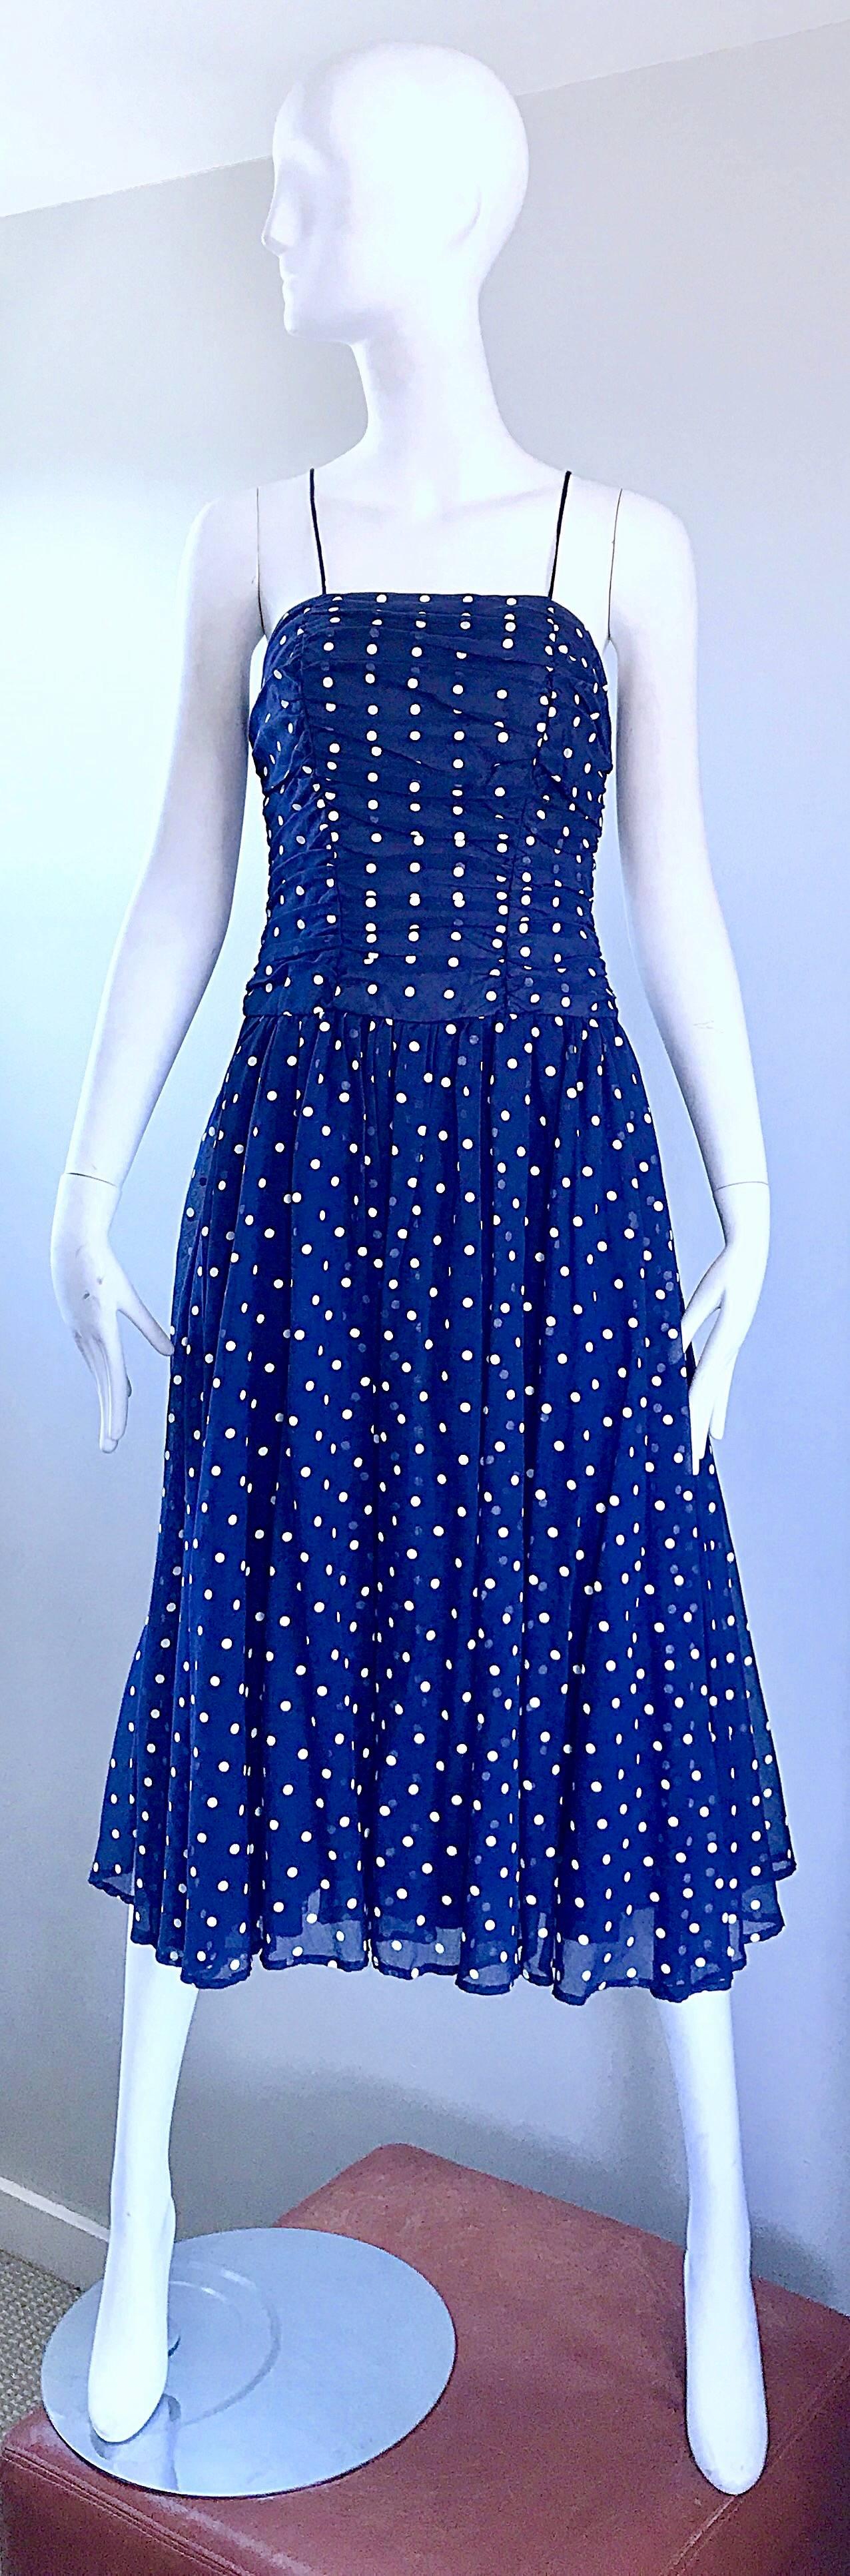 Chic Vintage Navy Blue and White Hand Painted Polka Dot Sleeveless Ruched Dress For Sale 2